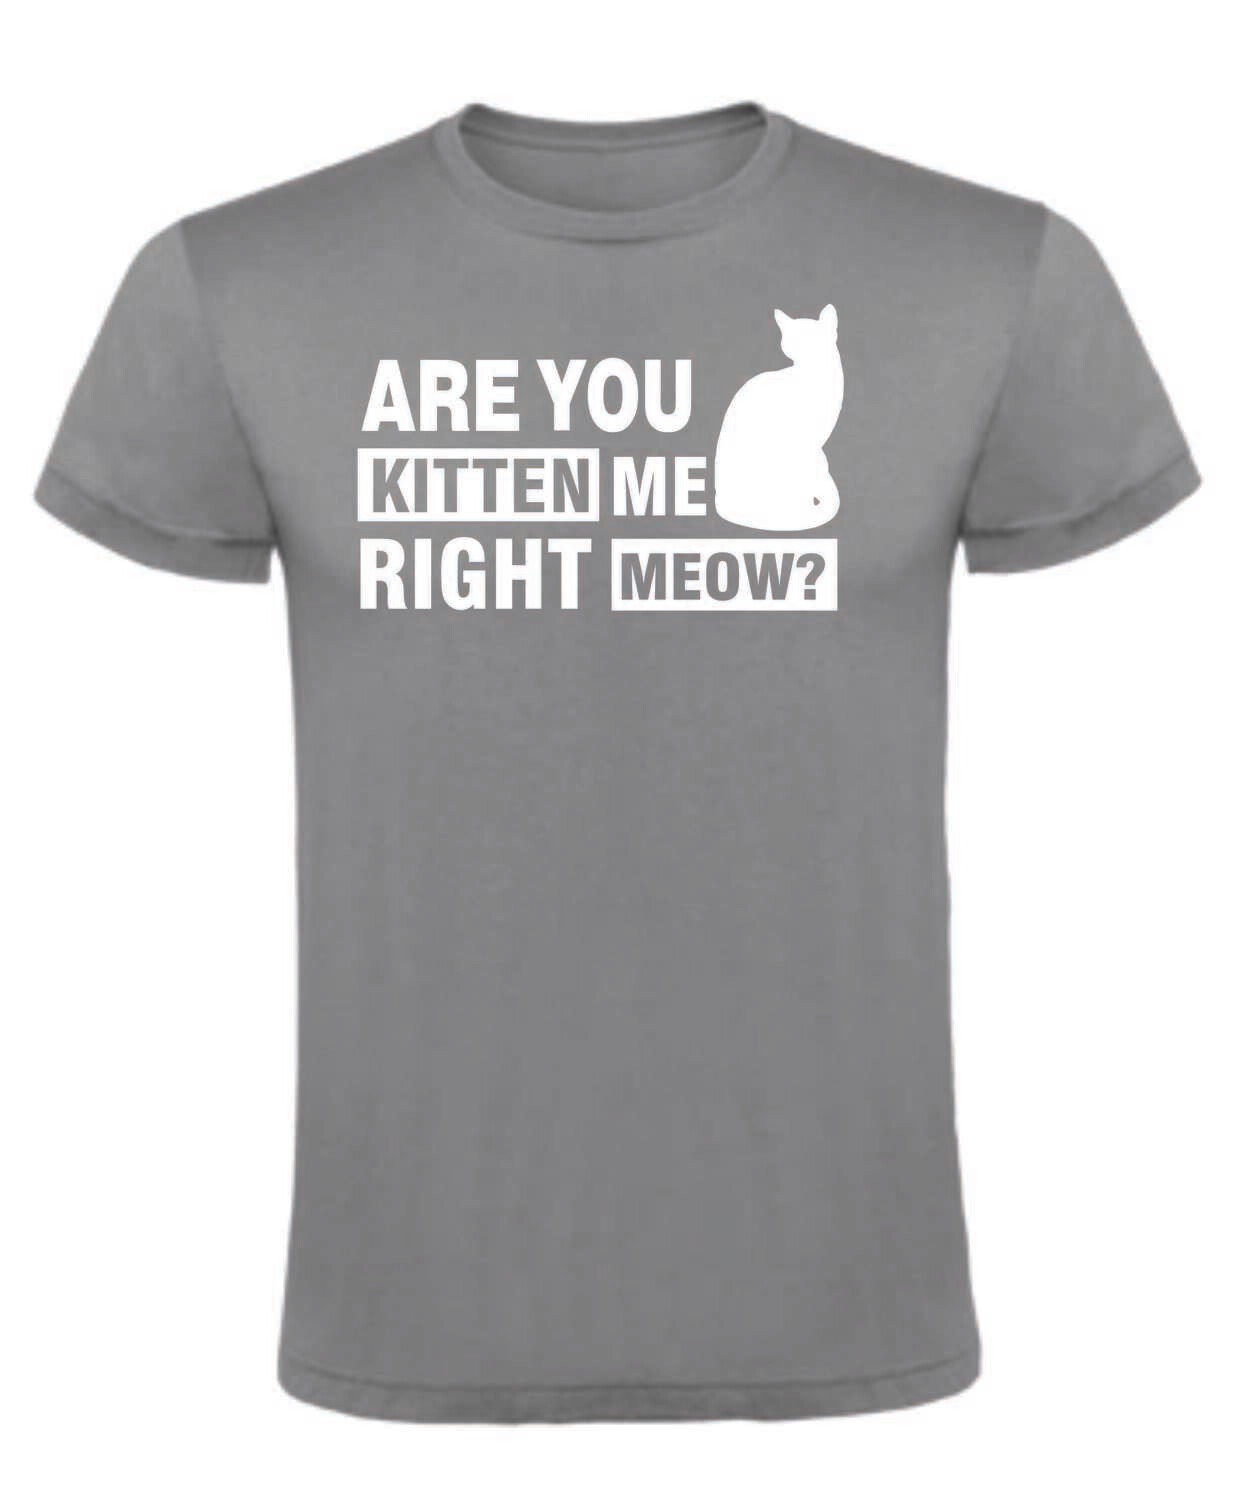 Are you Kitten Me T-shirt